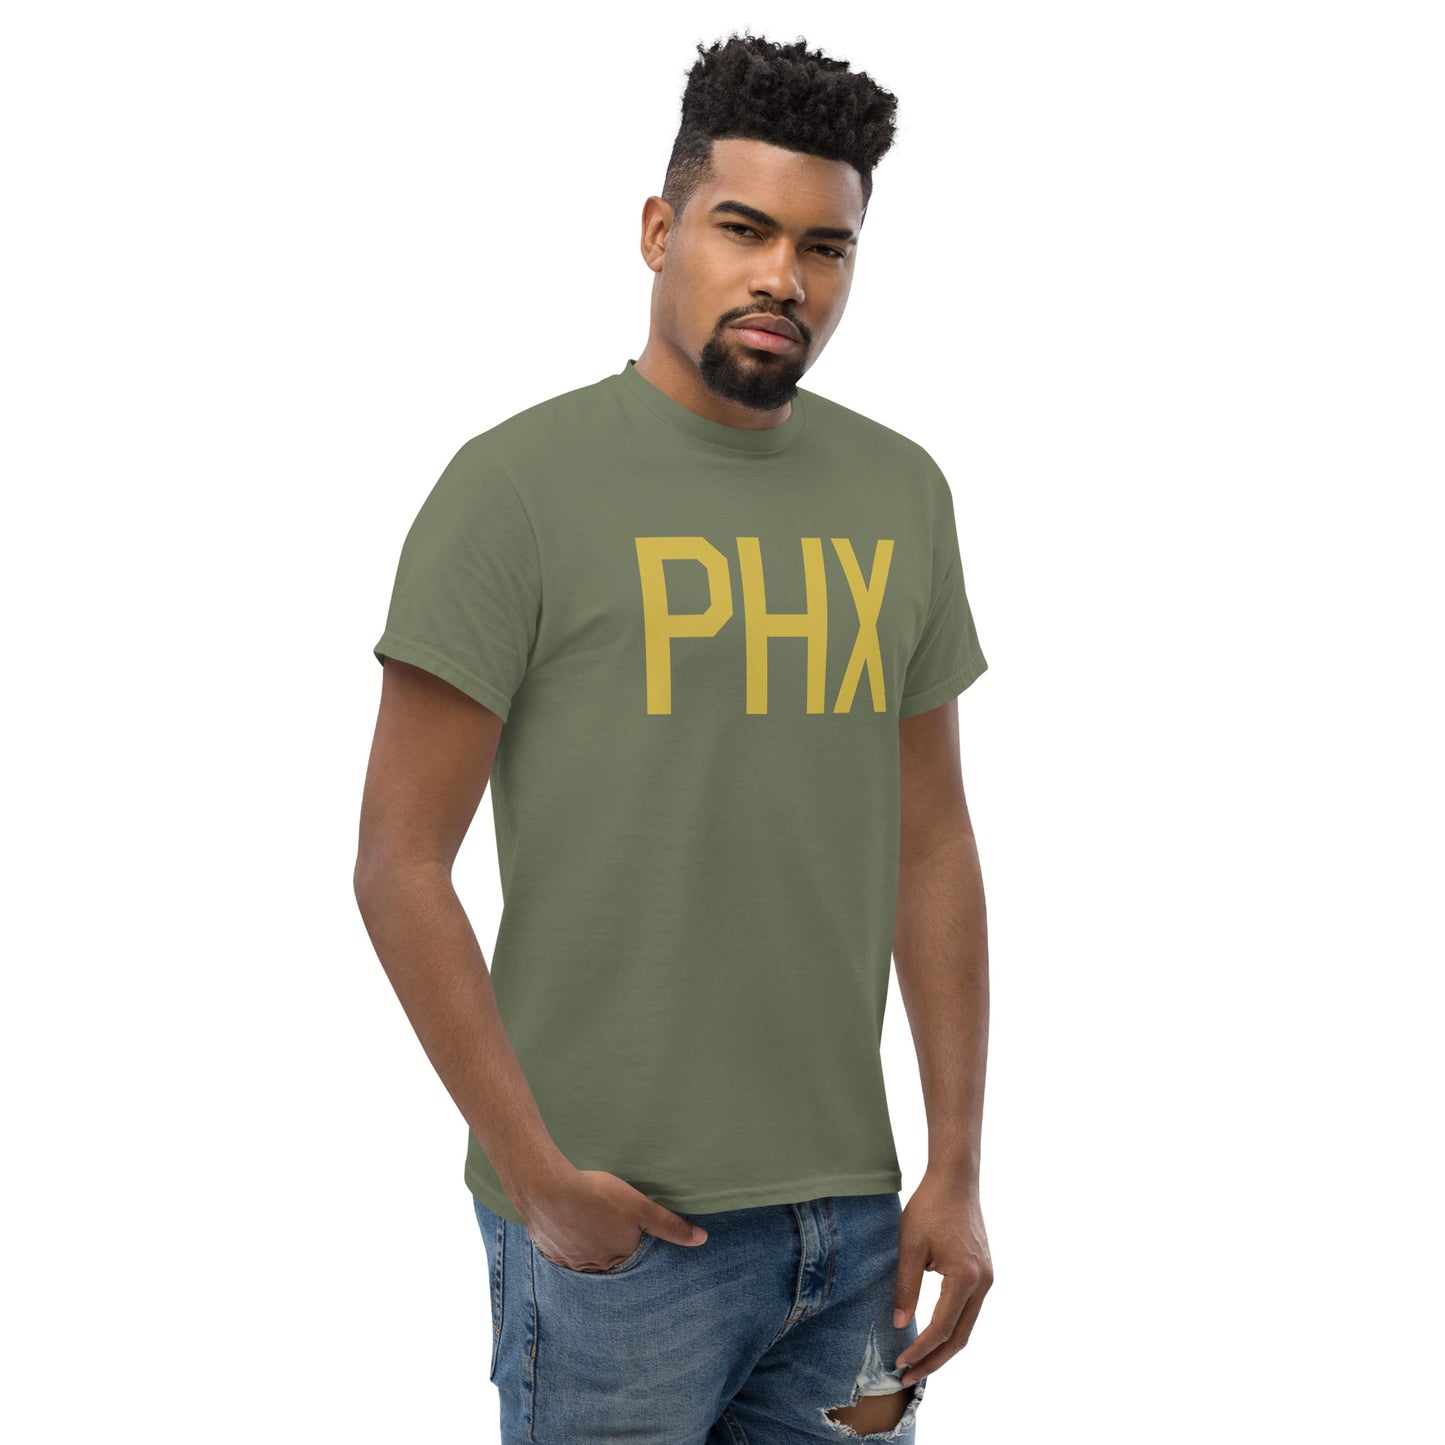 Aviation Enthusiast Men's Tee - Old Gold Graphic • PHX Phoenix • YHM Designs - Image 08